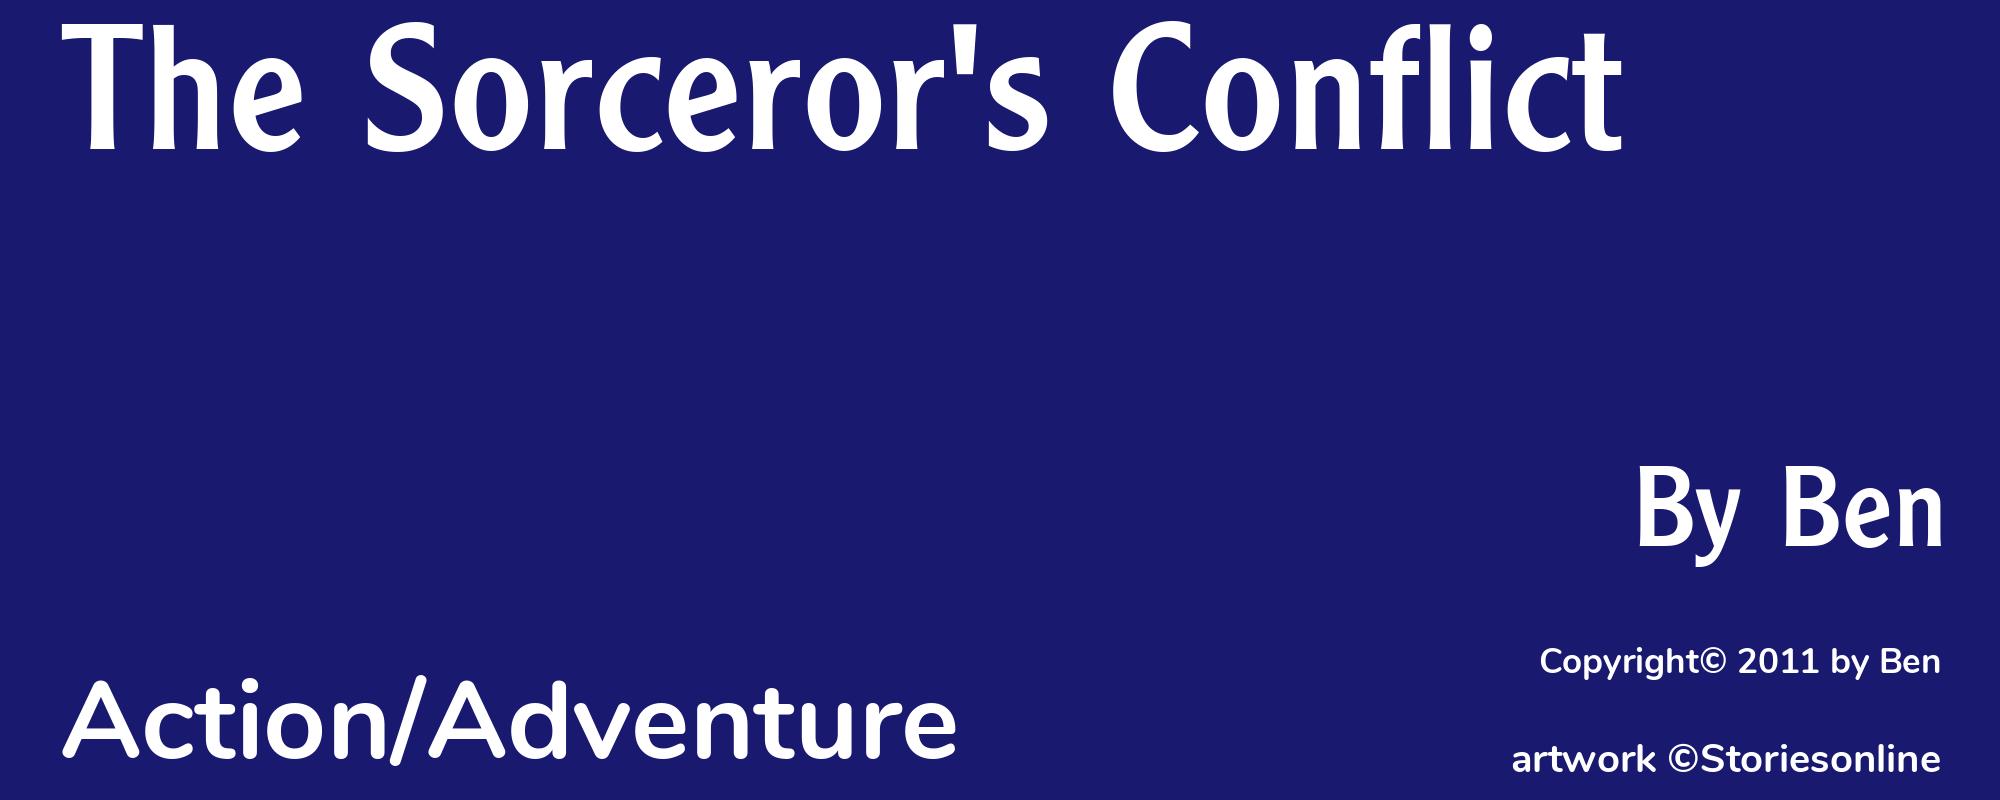 The Sorceror's Conflict - Cover